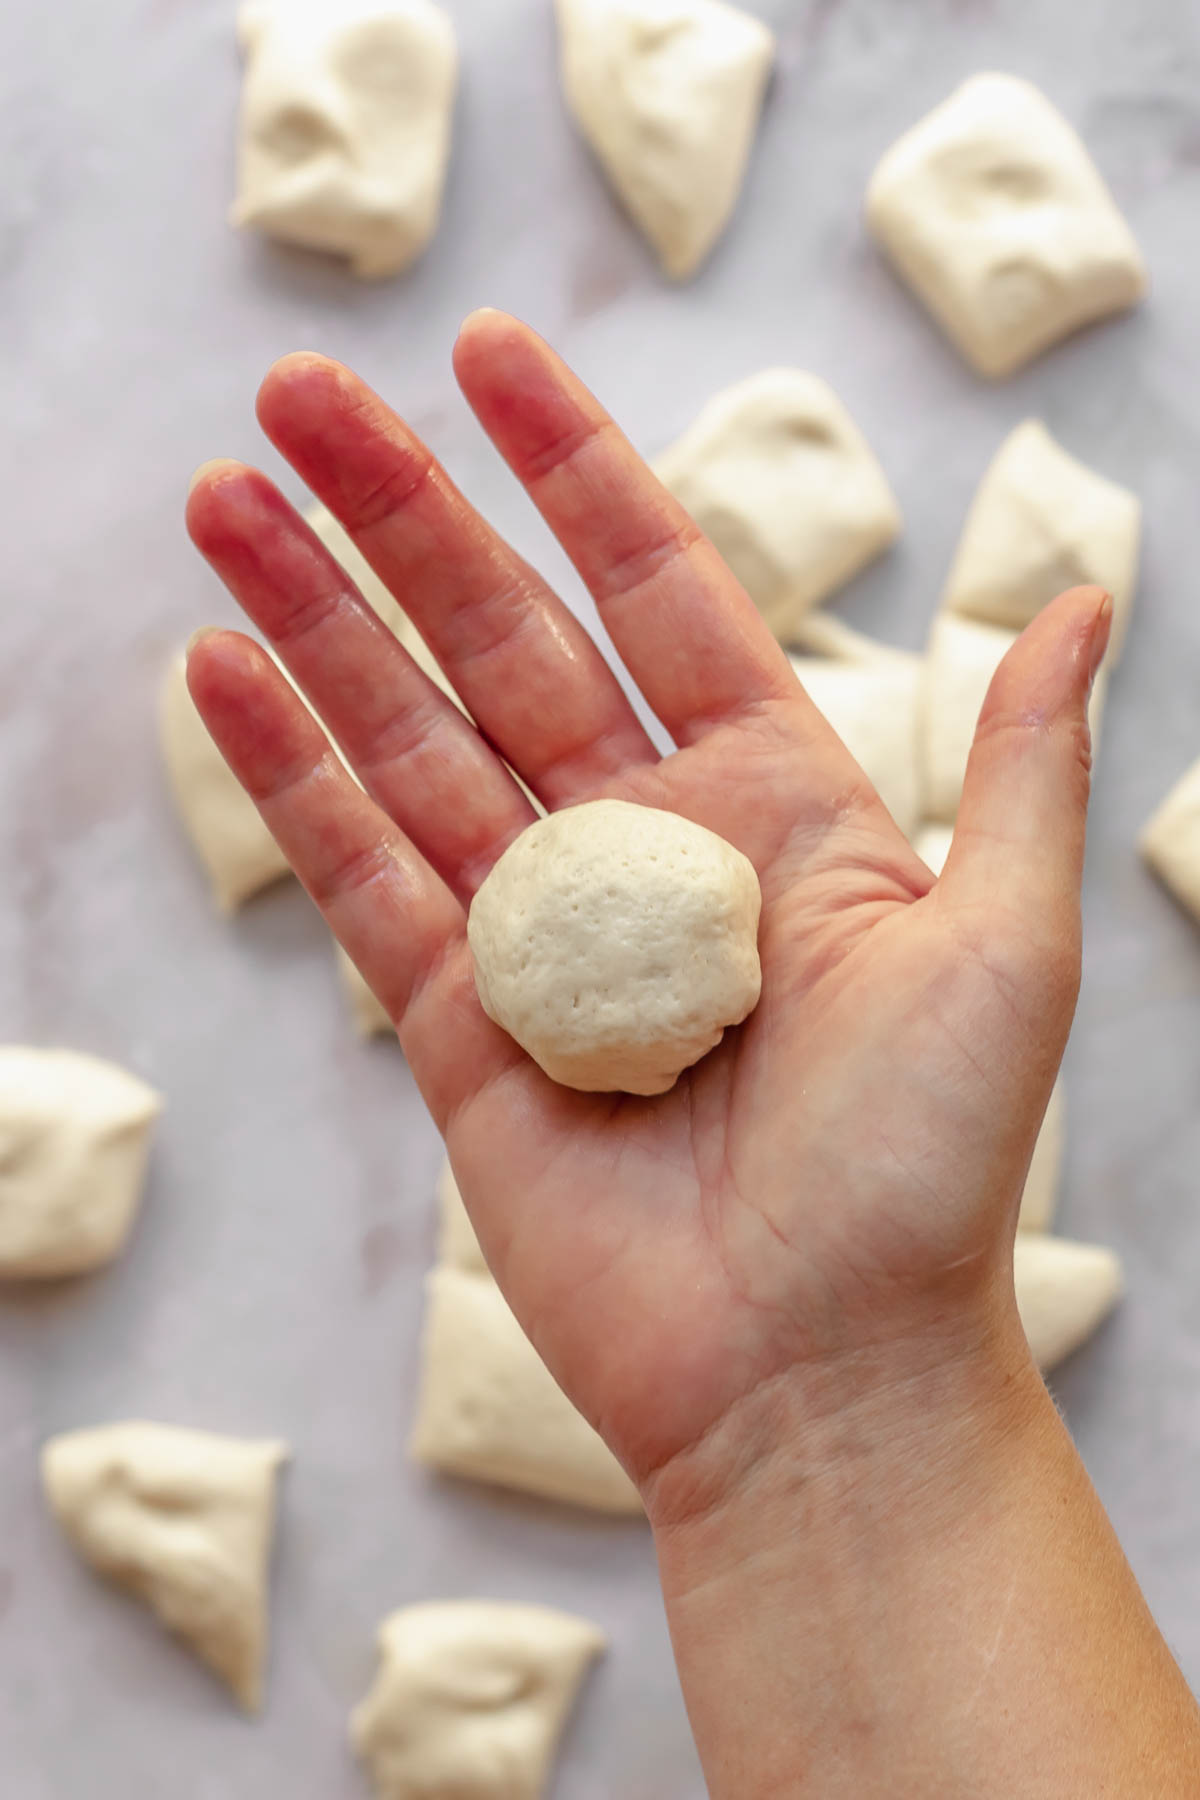 A round ball of pizza dough in the palm of a hand.